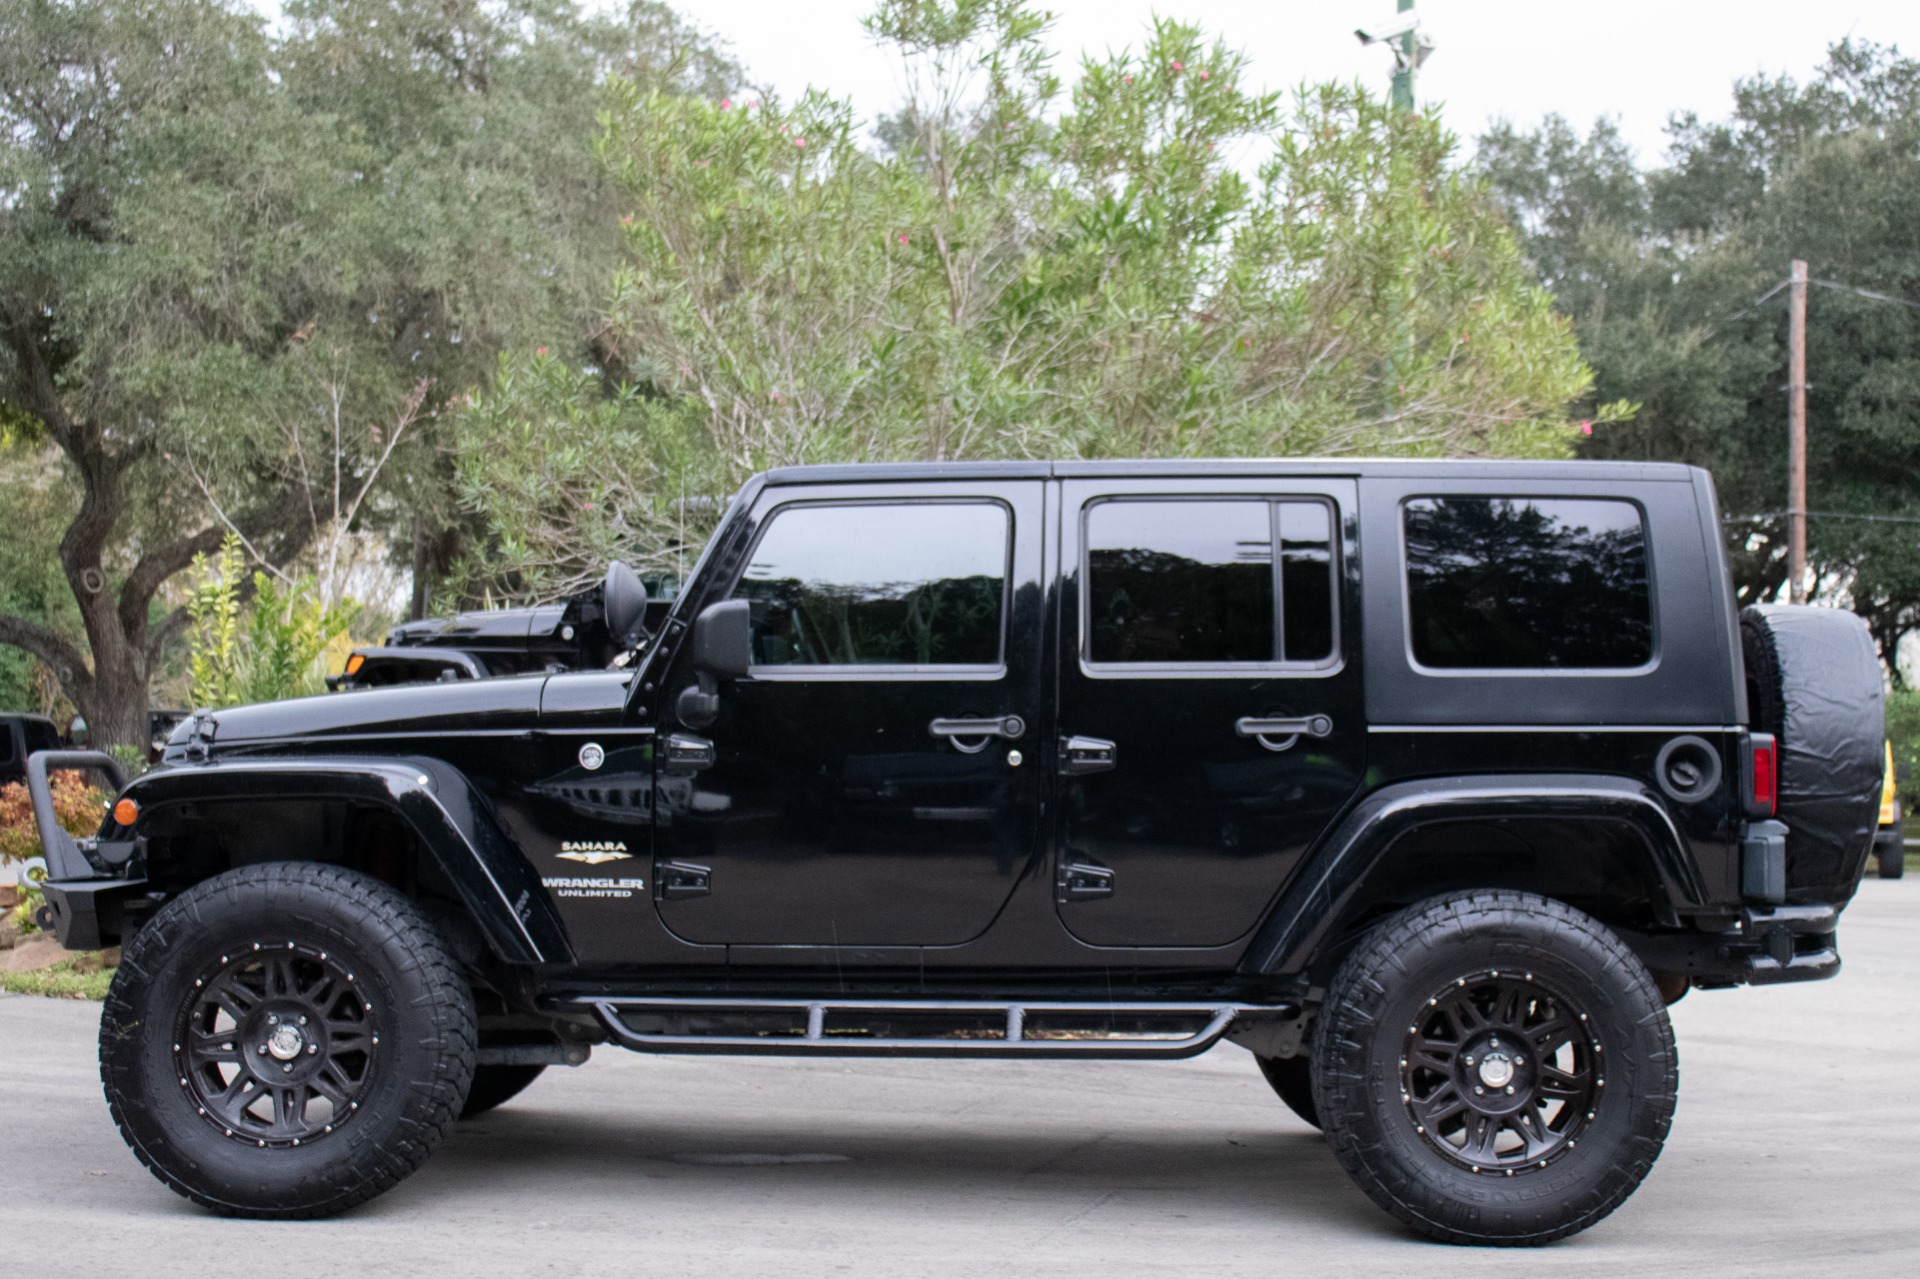 Jeep wrangler unlimited 2008